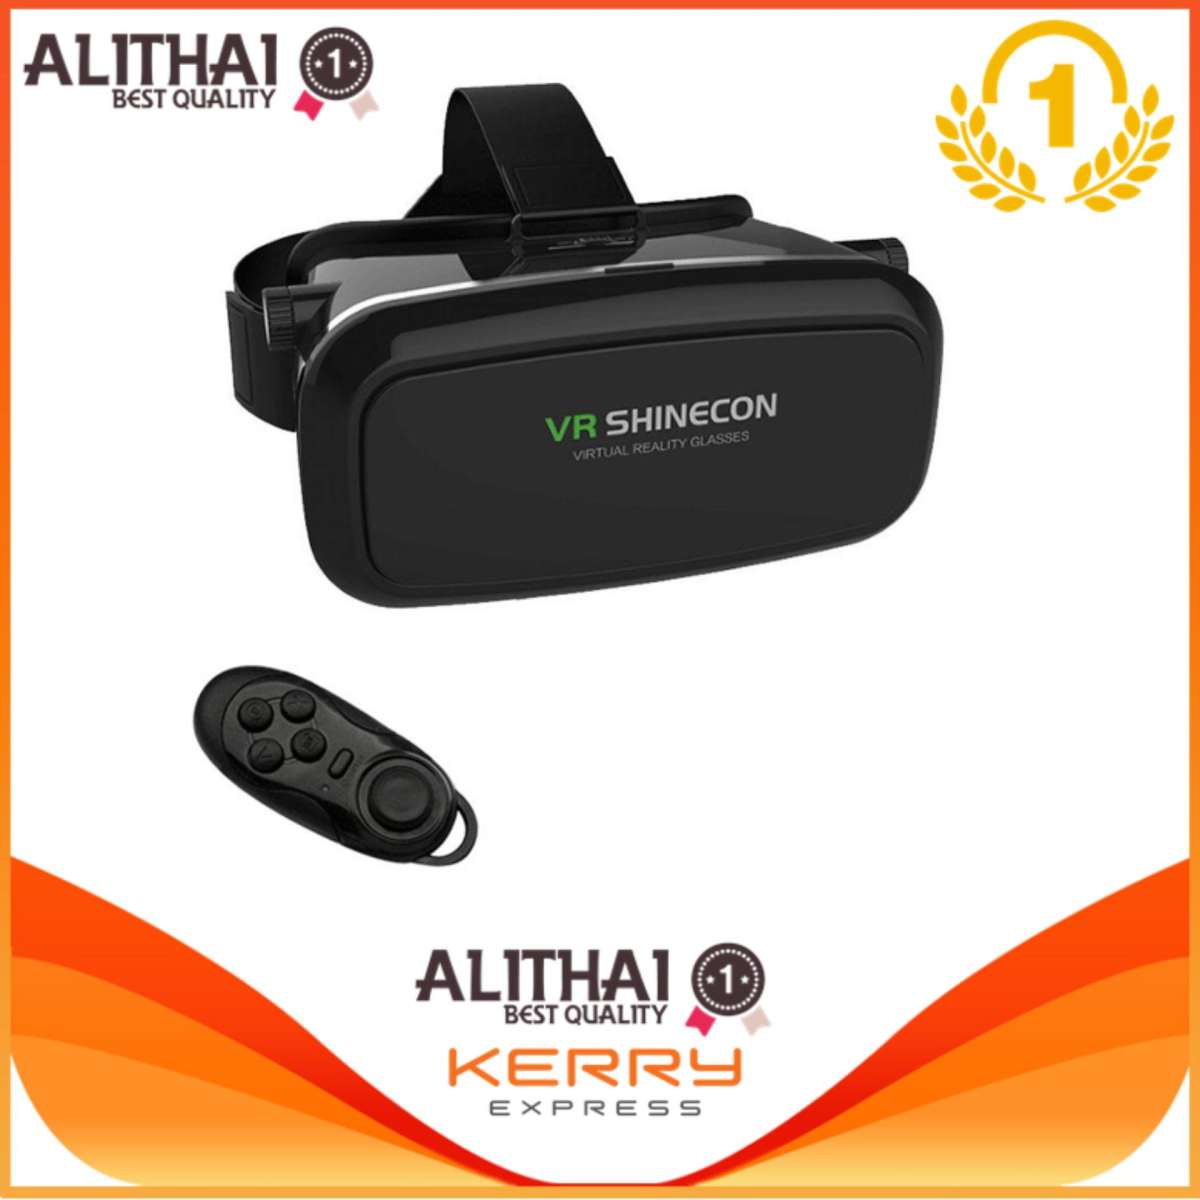 VR SHINECON Virtual Reality 3D Glasses ,VR BOX , Oculus Rift Head Mount 3D Movies Games For 3.5-6.0 inch Phone & Android XT-VRS01R INCLUDING BLUETOOTH REMOTE